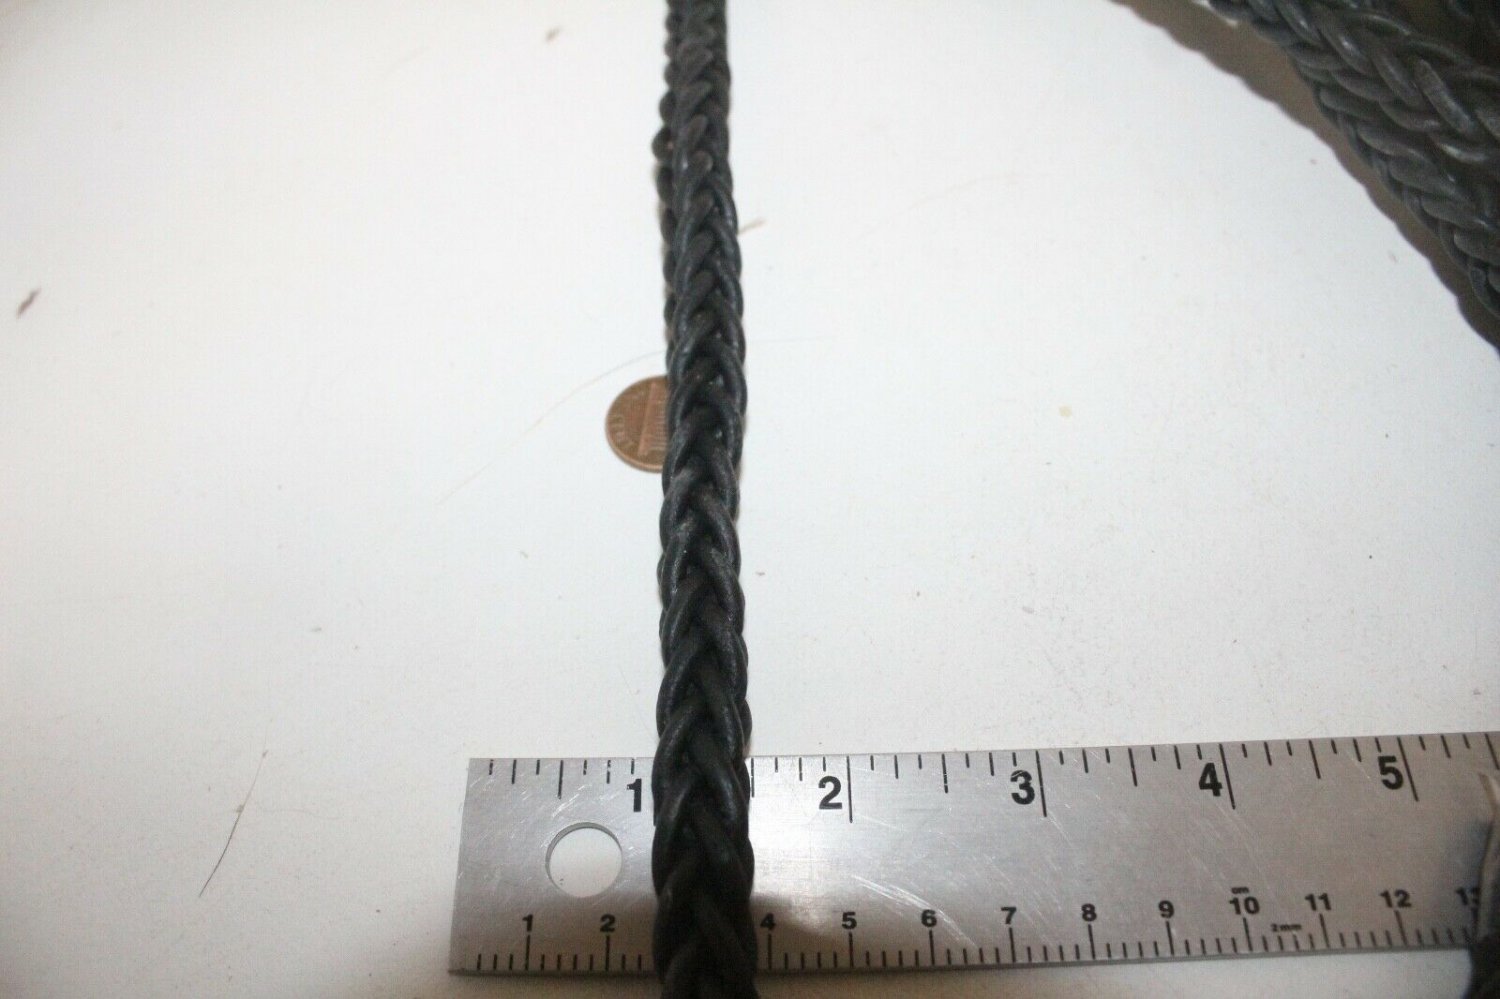 Leather braided square cord 20 yards B209D Antique black 11mm size (7/16